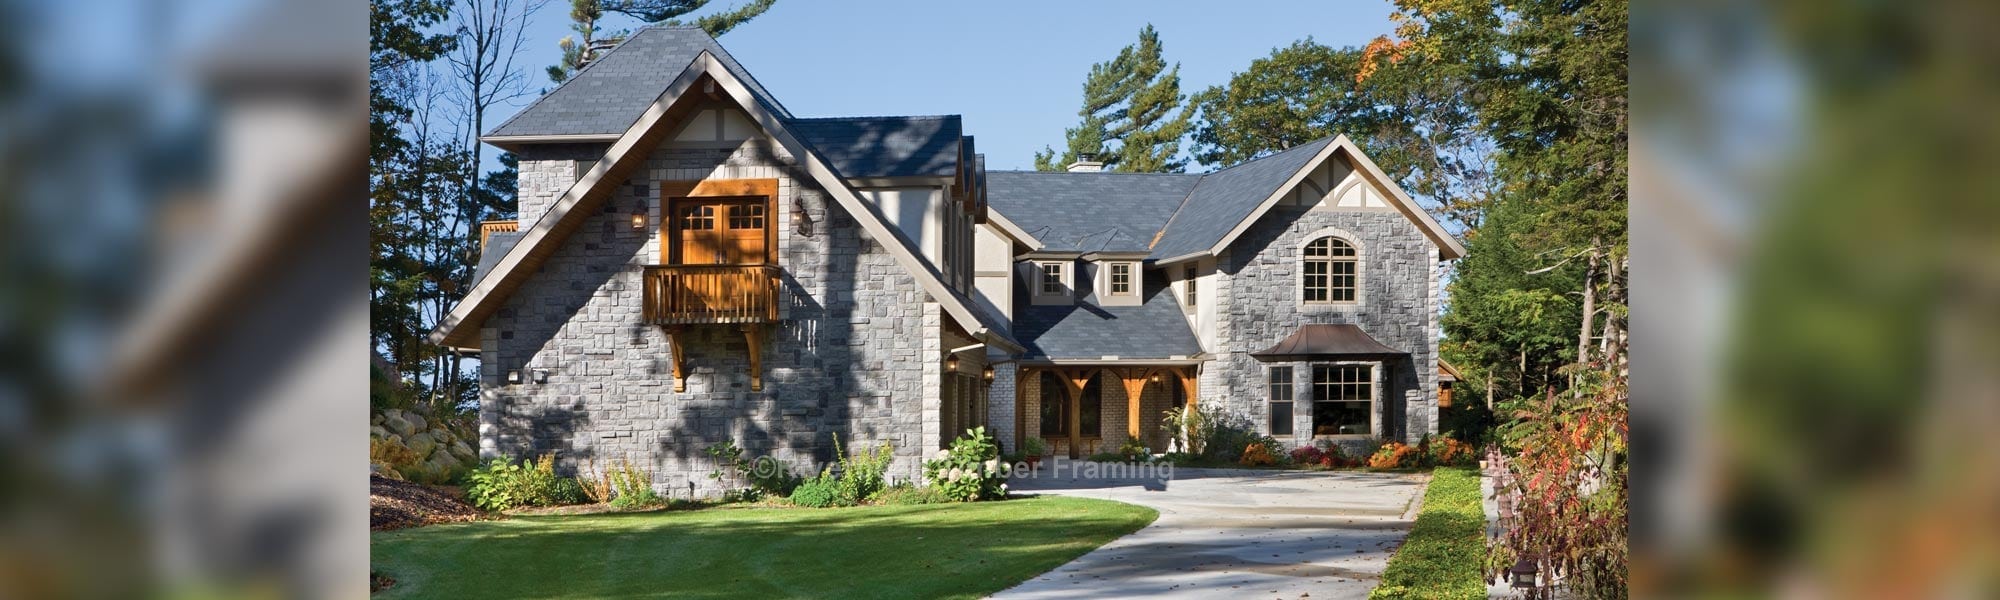 timber frame home with a grey stone exterior and a personal balcony